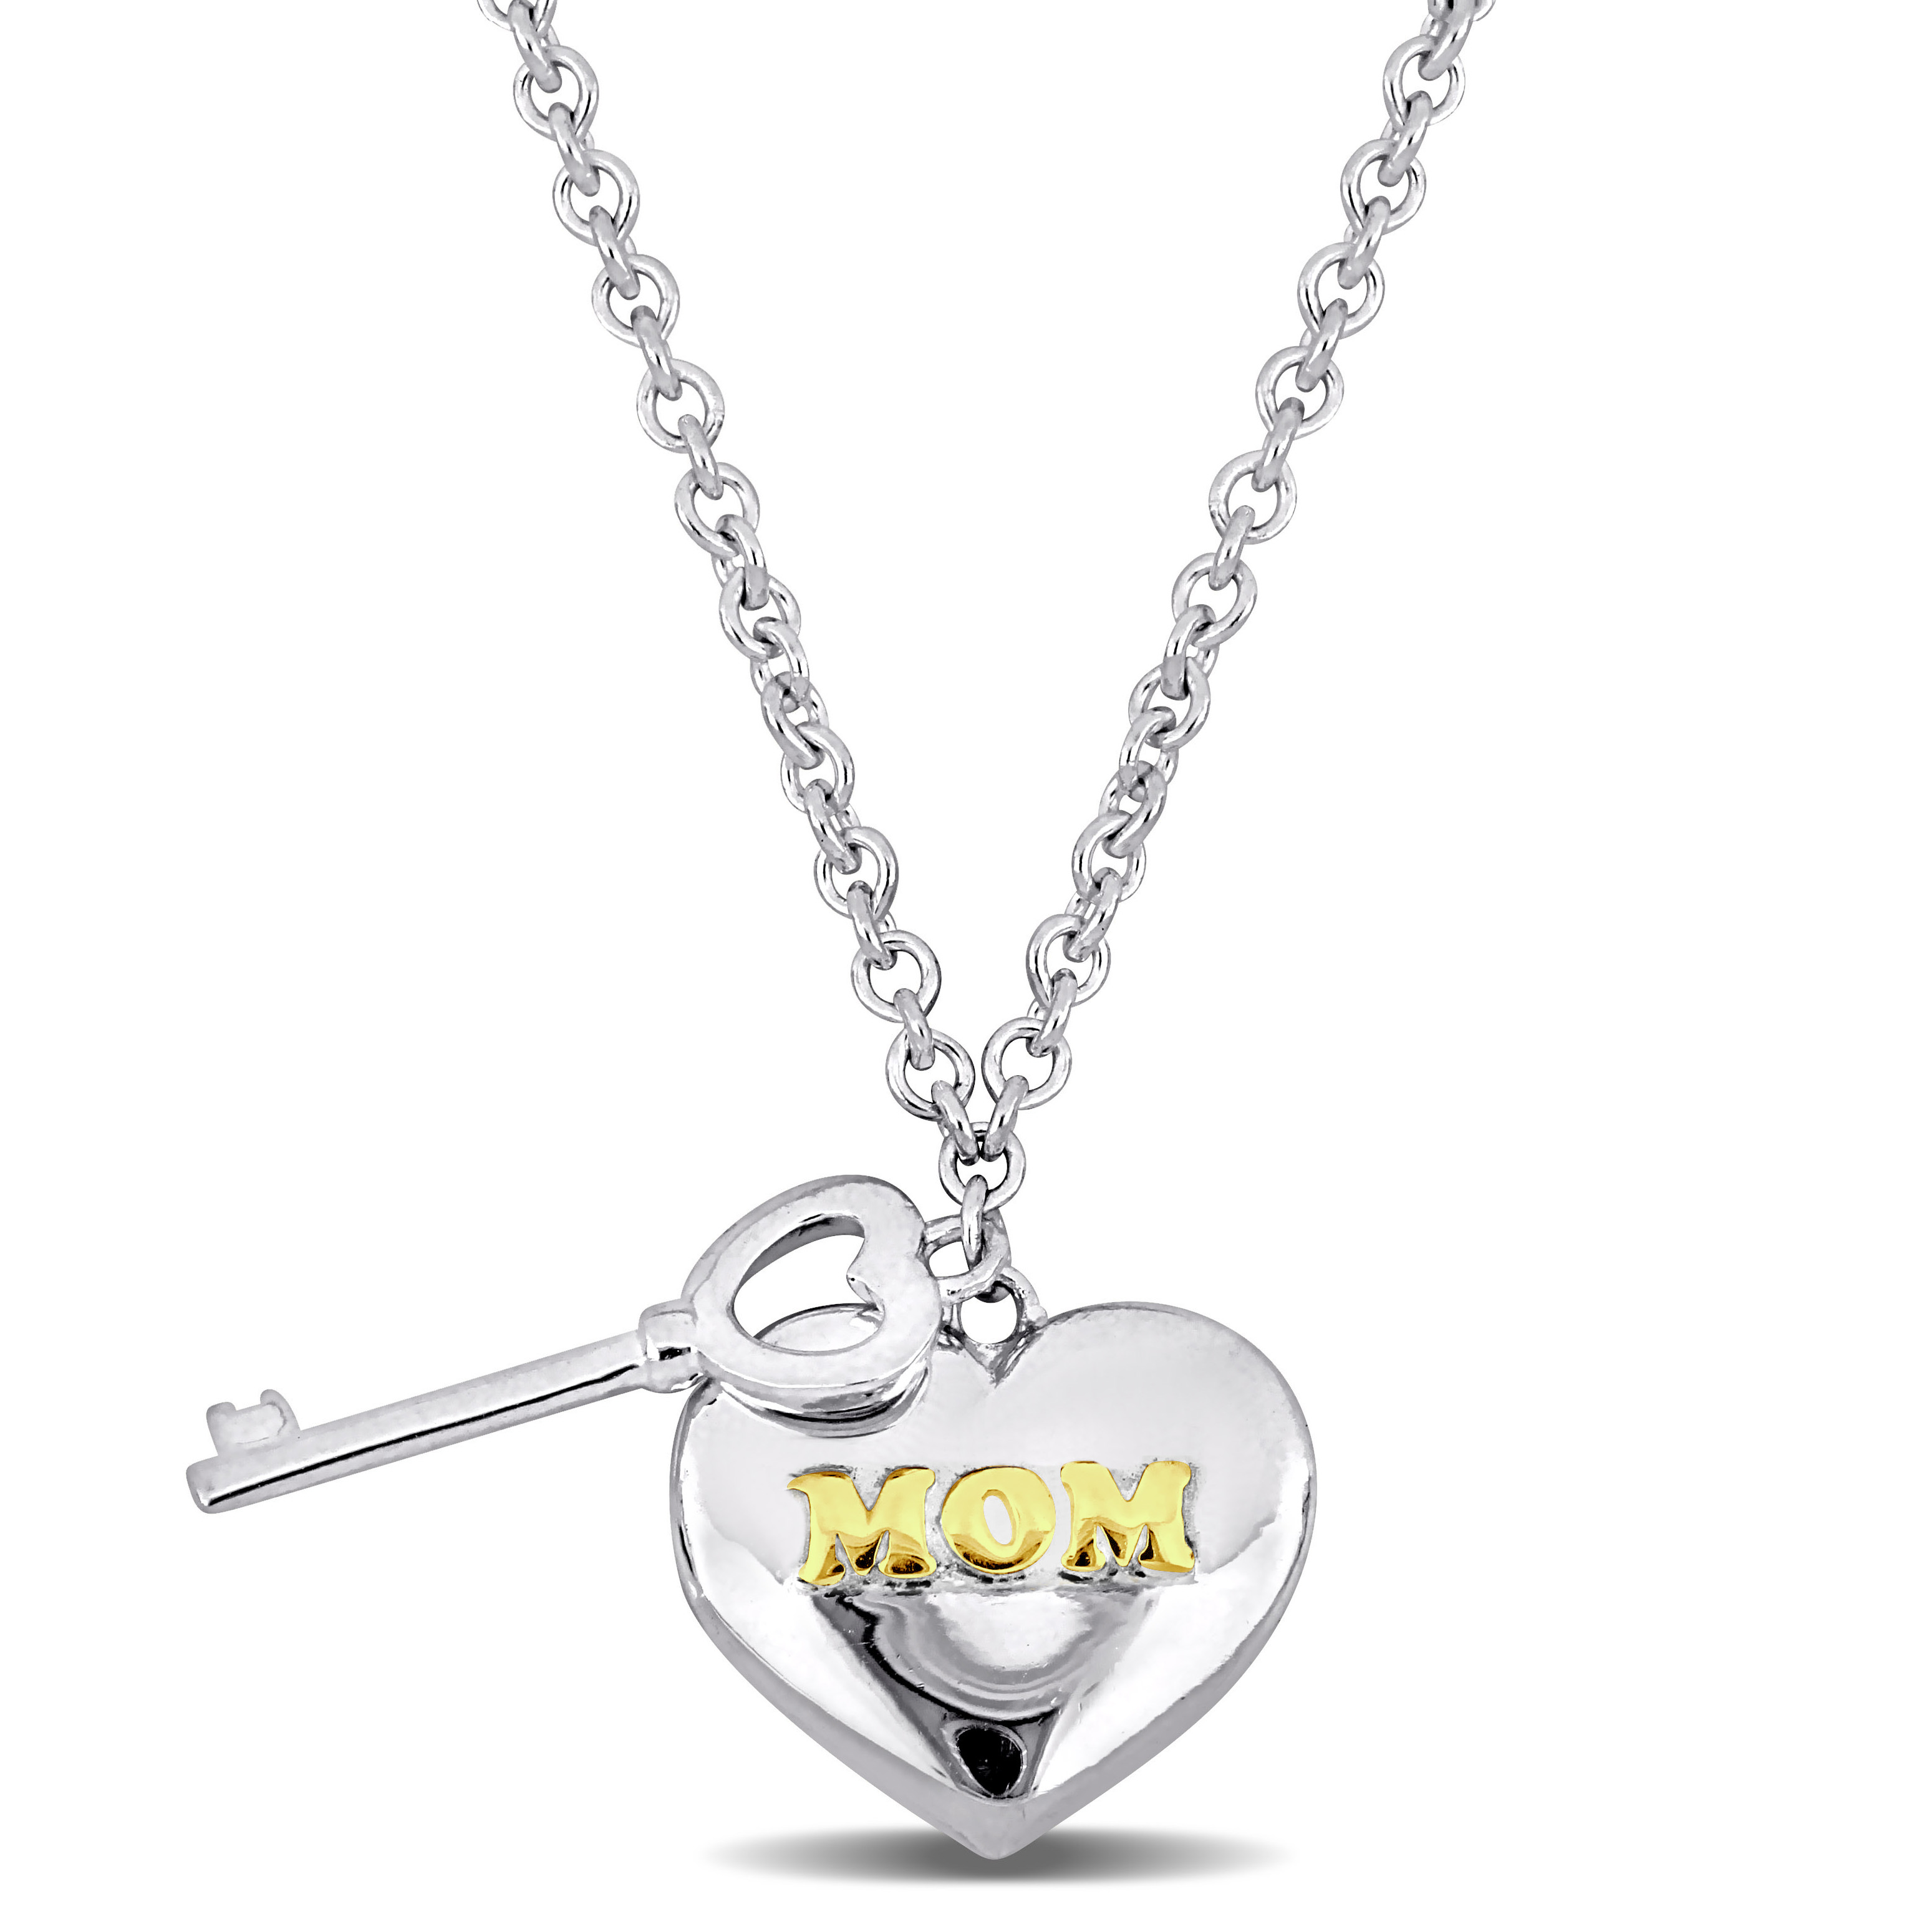 Heart and Key Charm Mother's Day Necklace in Sterling Silver w/ 18k Yellow Gold Plating - 16+2 in.